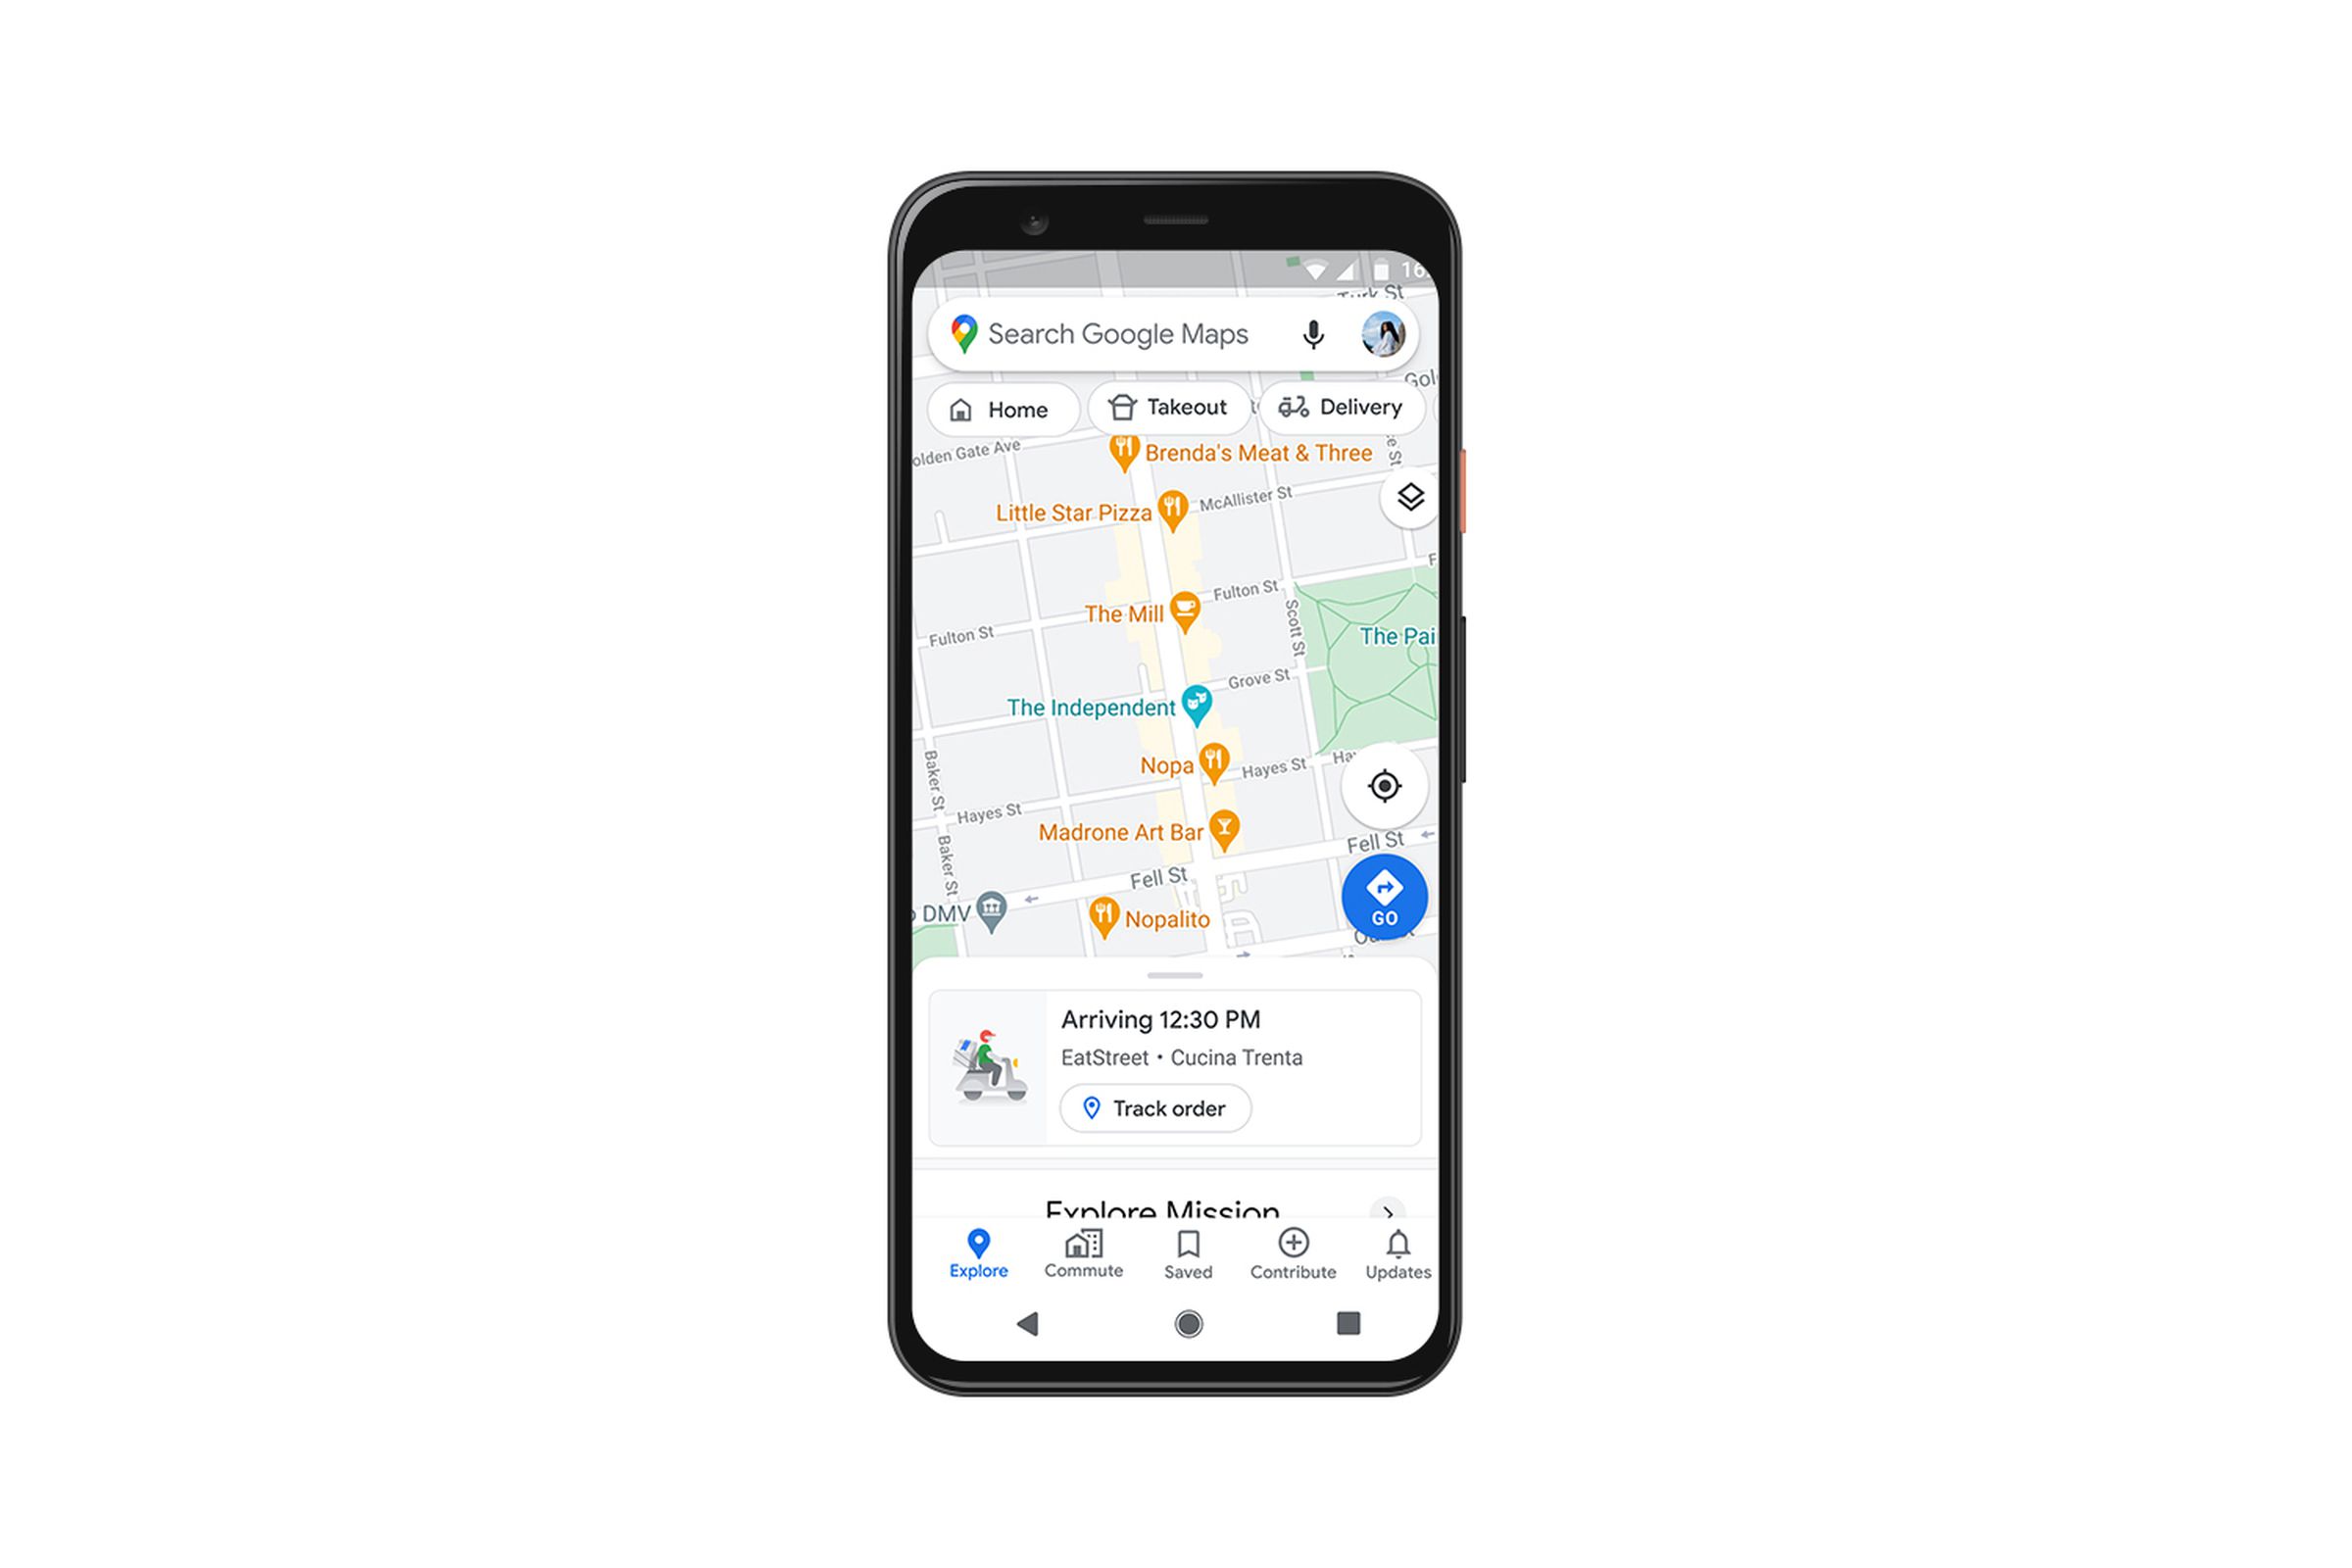 Google Maps can now give predicted delivery times for food orders in select markets.